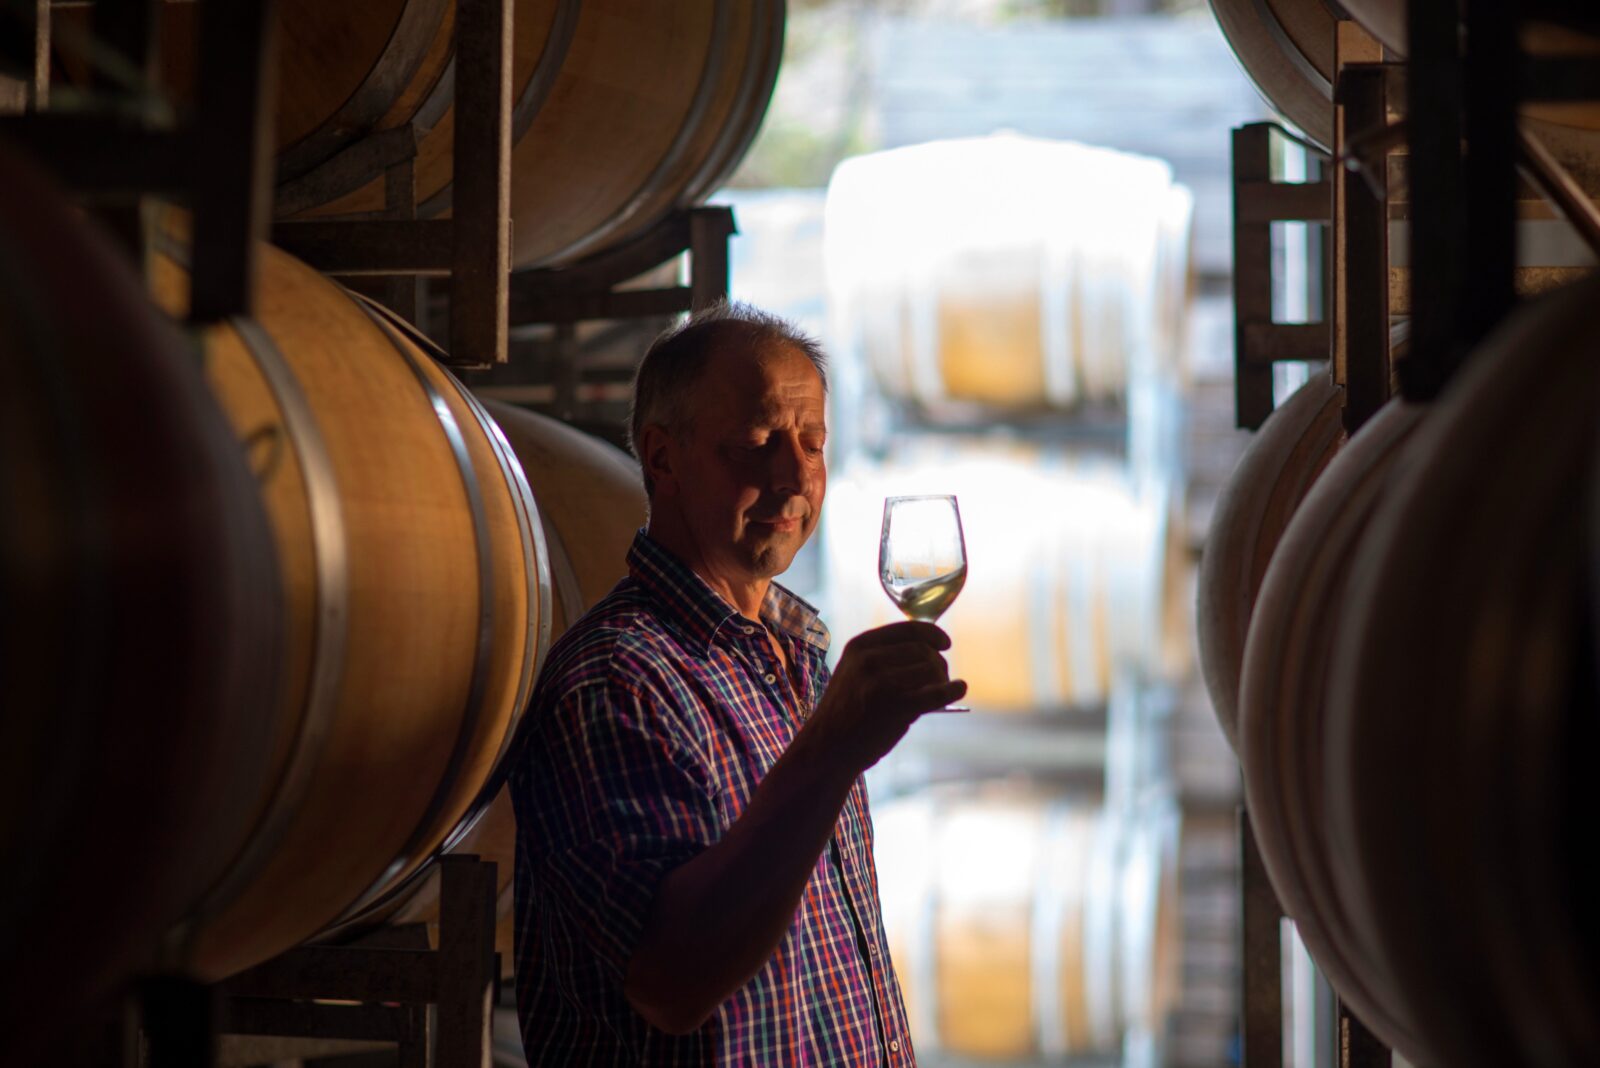 Claudio Radenti of Freycinet Vineyard, looking at a glass of wine in a barrel room